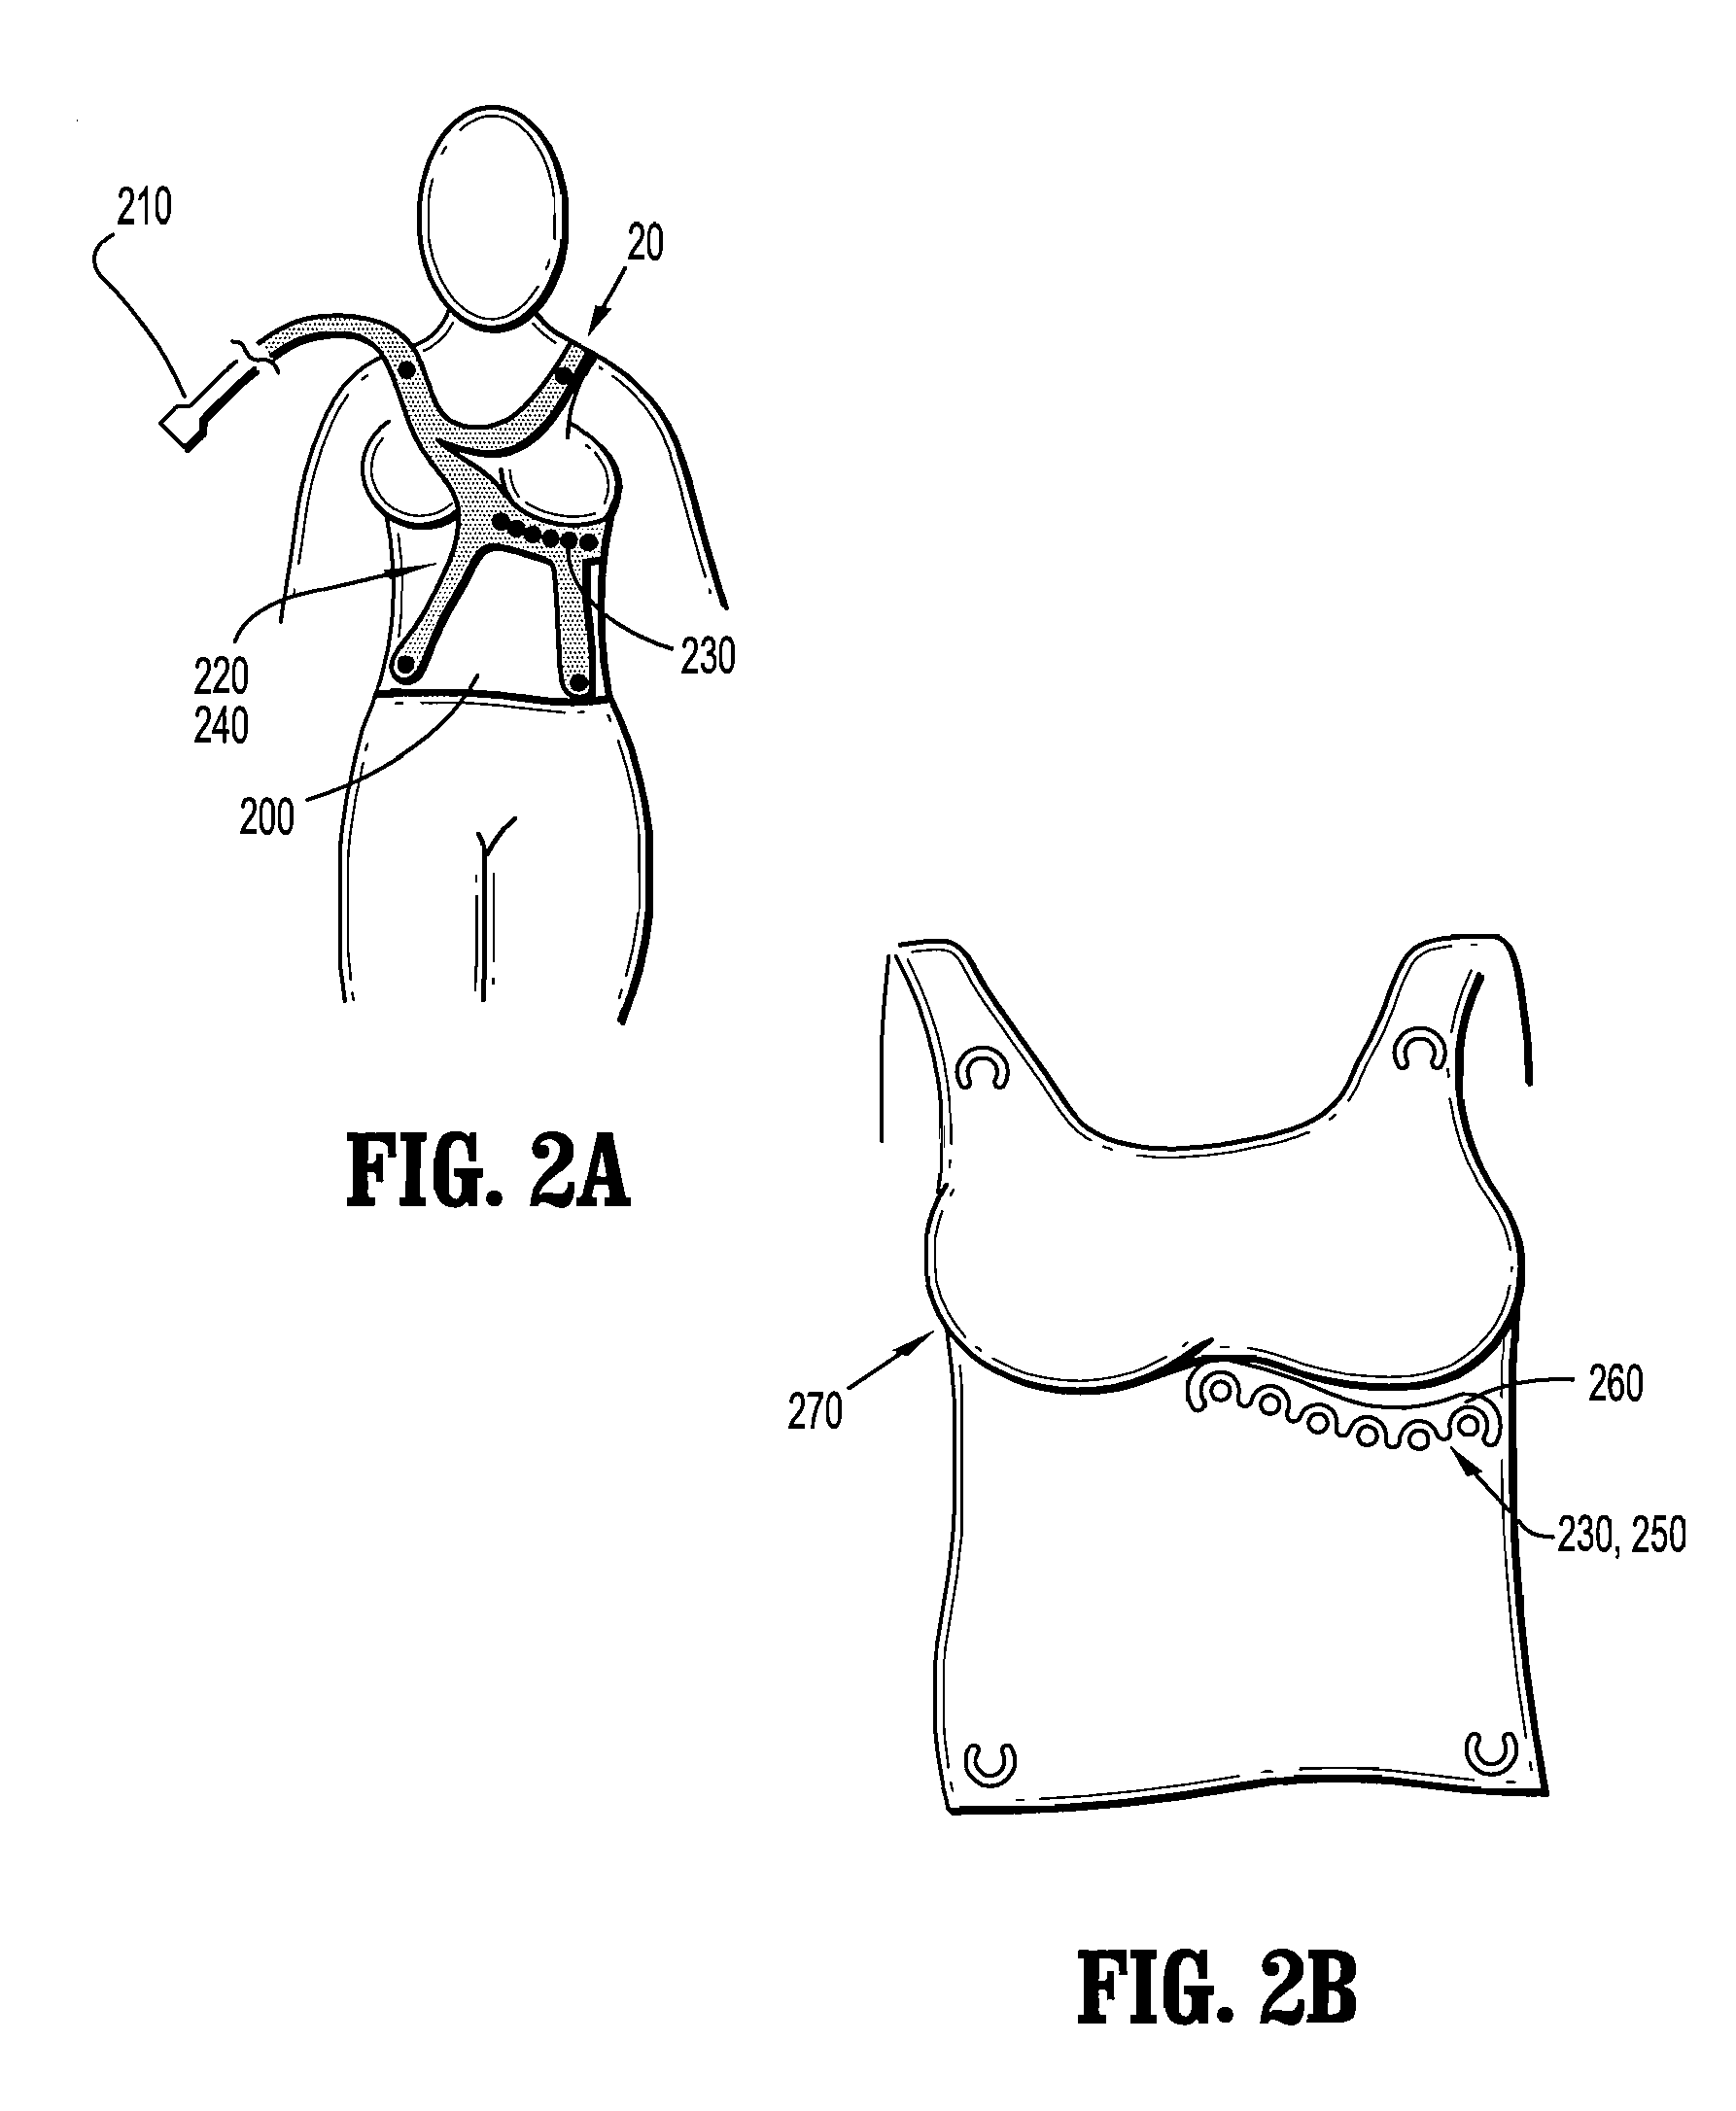 Physiological Sensor Placement and Signal Transmission Device